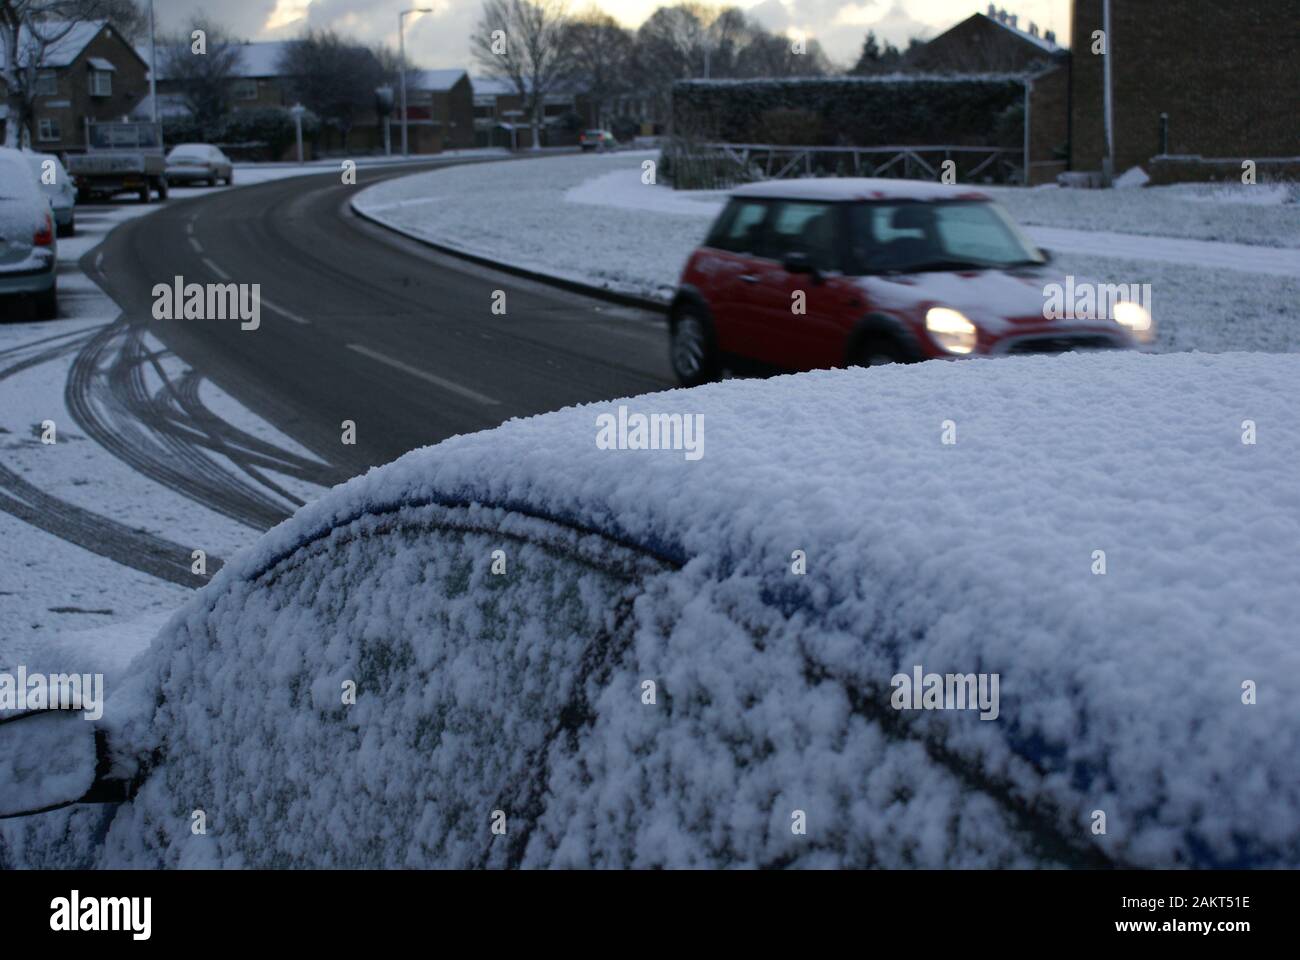 snow cold weather Hazard, icy road conditions Stock Photo